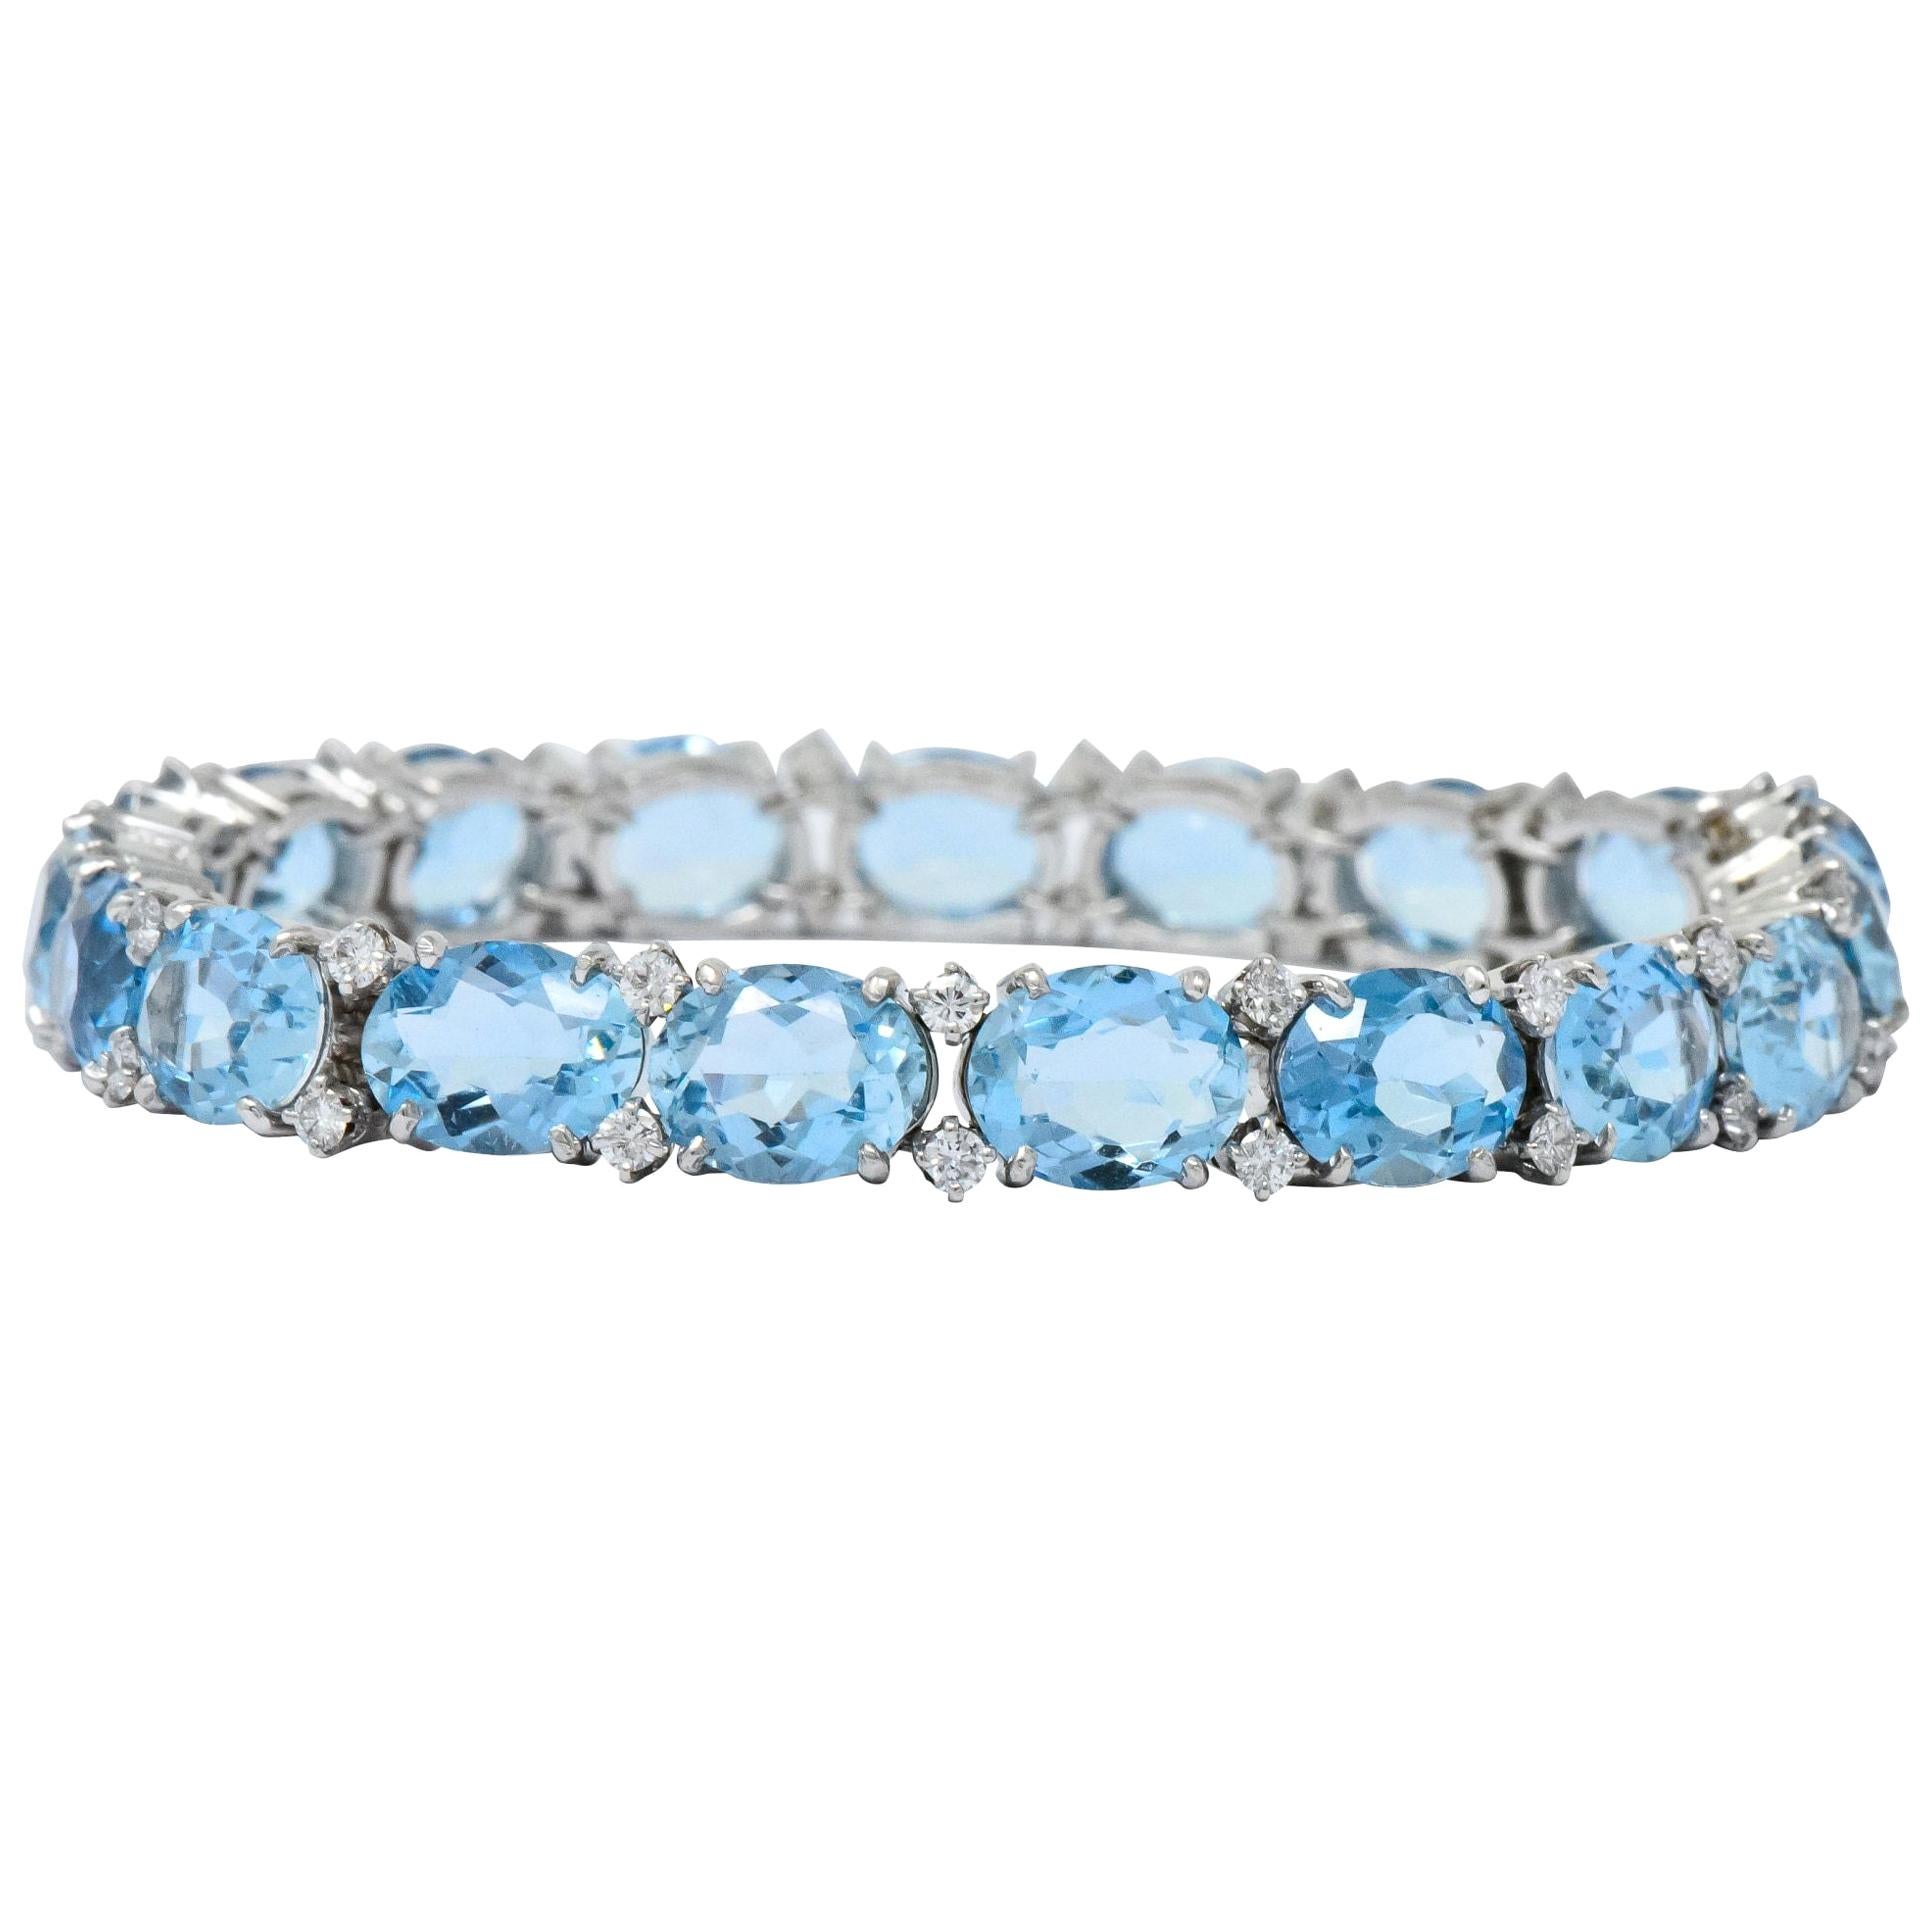 Each link centering faceted oval aquamarine weighing approximately 28.43 carats total

Cool blue color, eye-clean, and very well matched

Accented by round brilliant cut diamonds weighing approximately 1.15 carats total, G/H VS1

Completed by